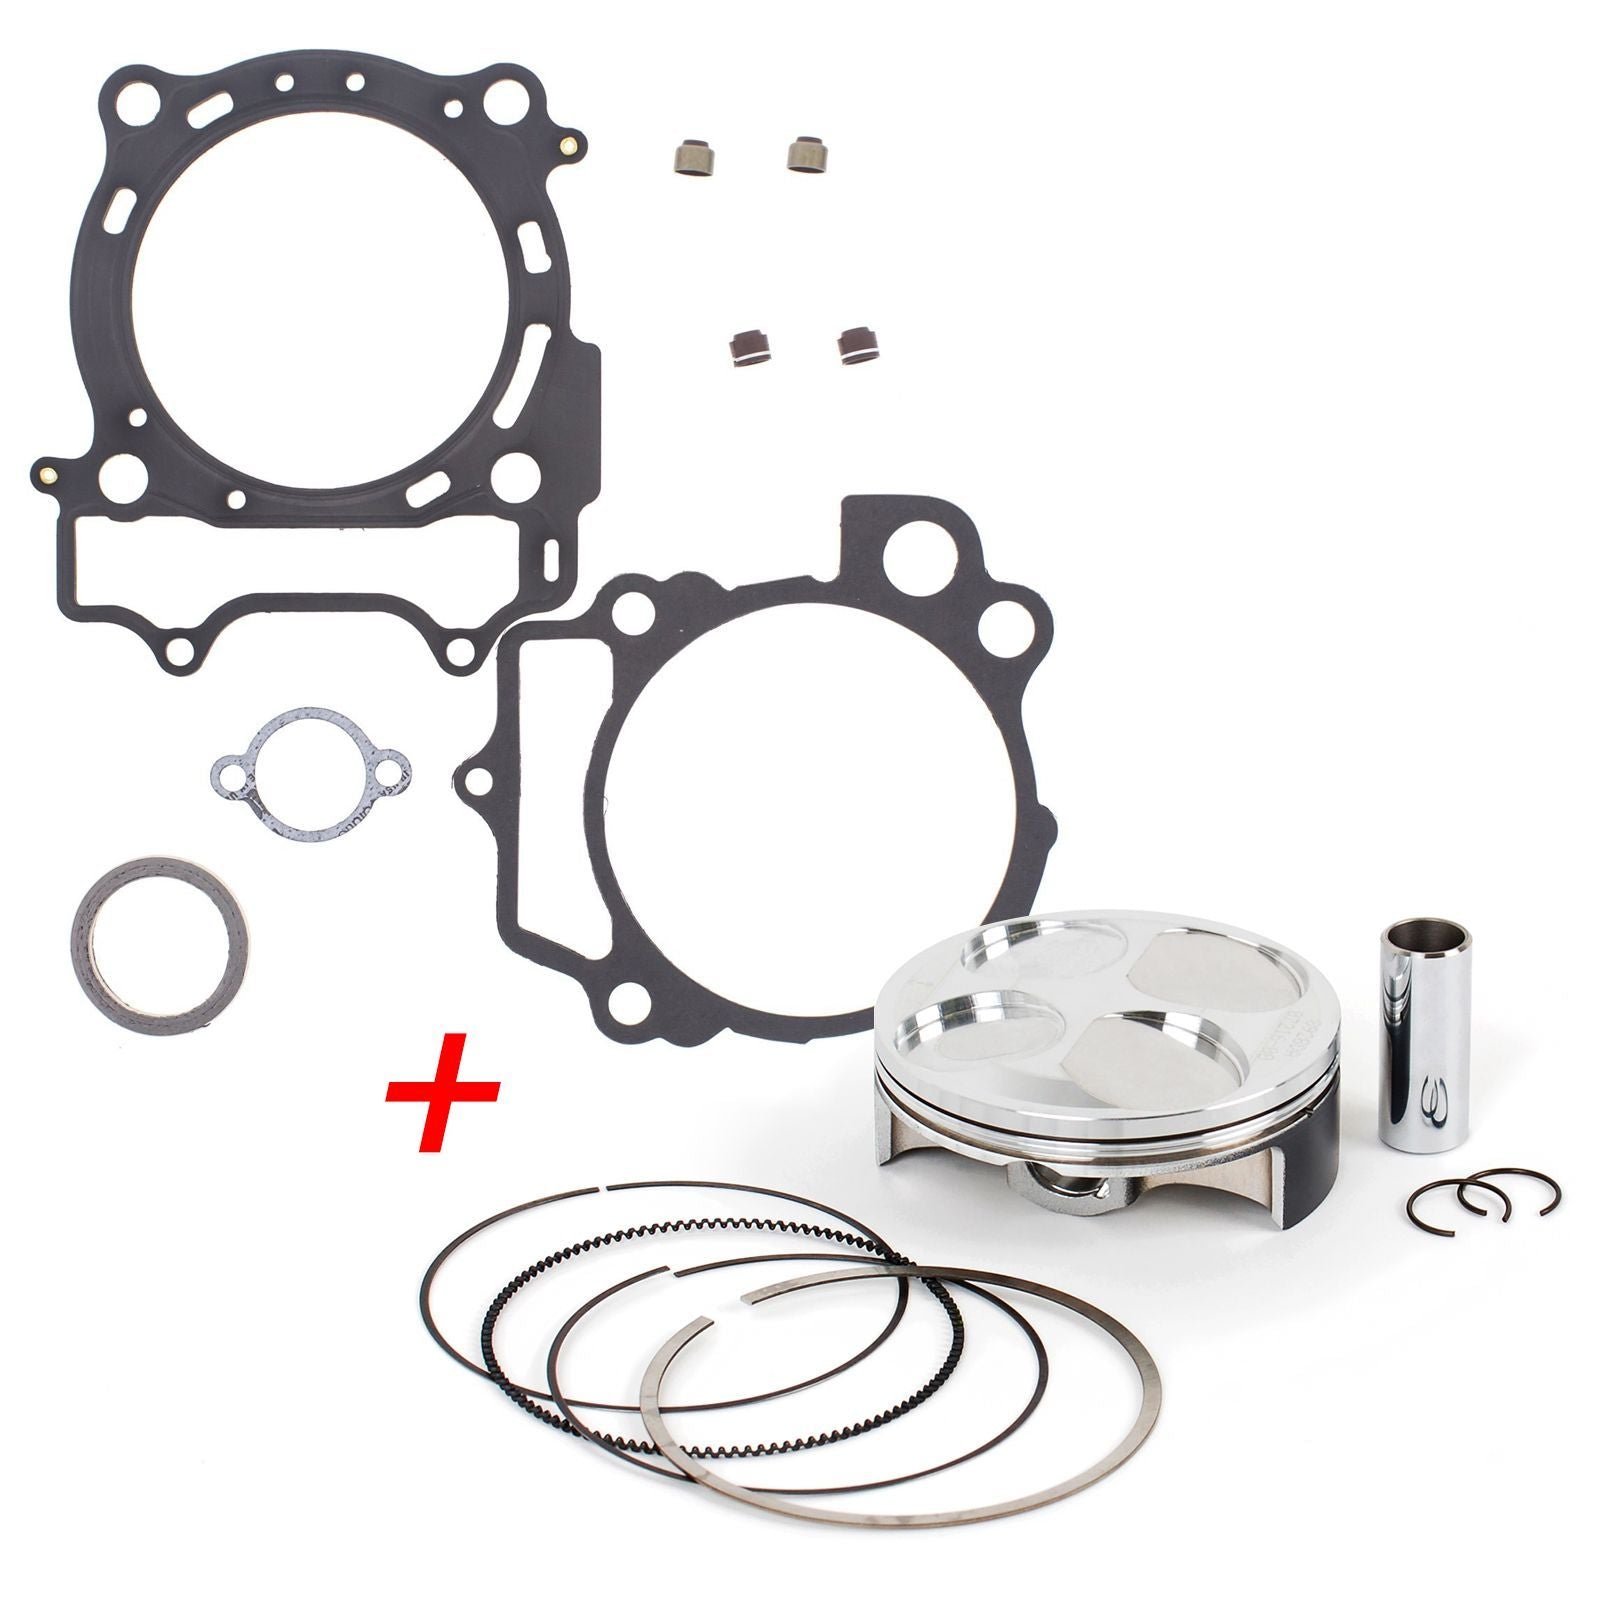 New Top End Rebuild Kit (A) For KTM 500/525 SX/EXC 2000-2007 #ERTKT040A